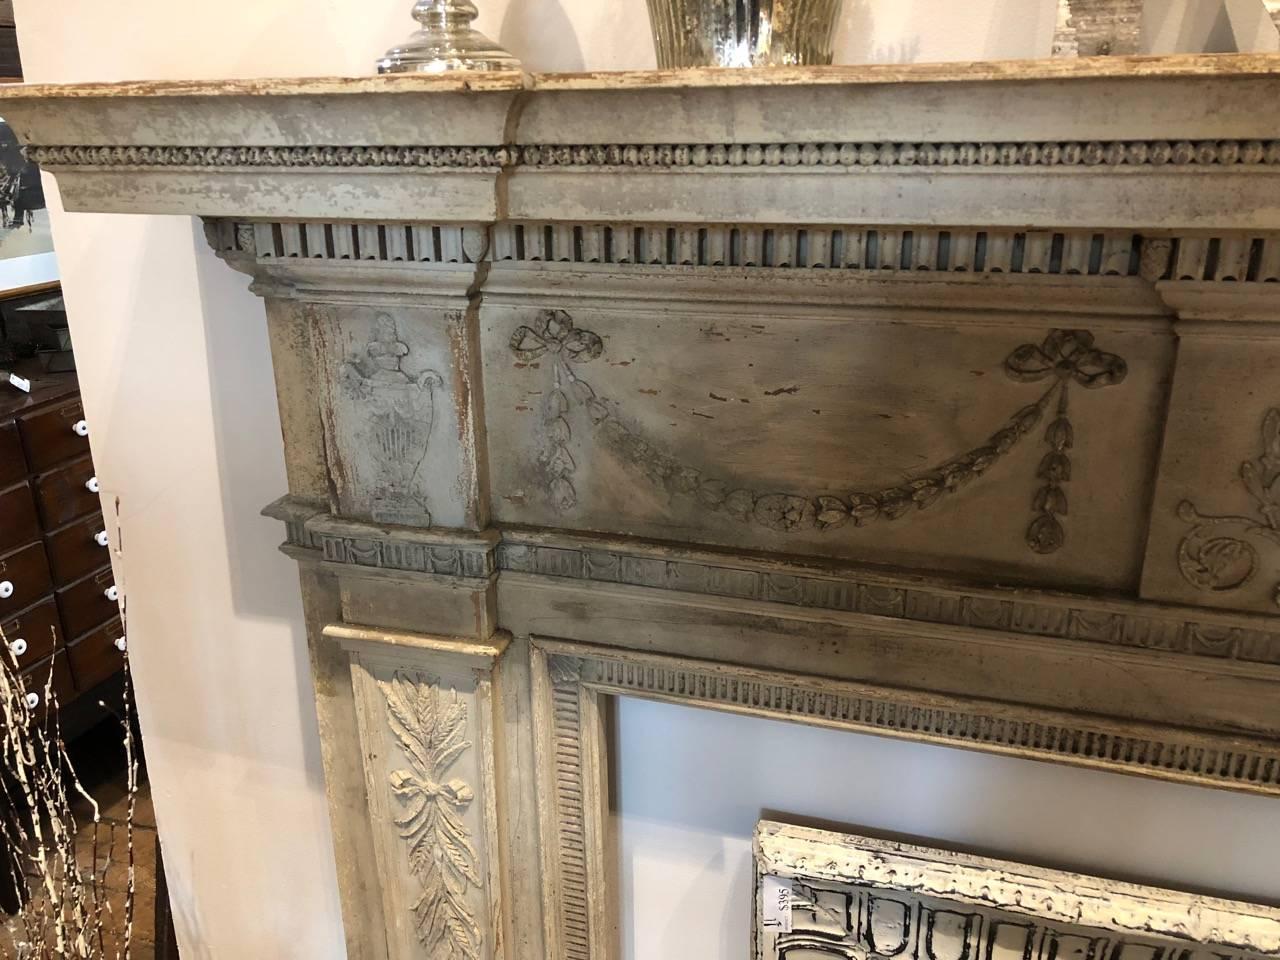 Gorgeous fireplace mantel in a greyish off-white composition with Classic Federal Revival design. A 19th century reproduction of an 18th century mantel in the Blair House in Washington DC. Opening measures 52 wide and 40 high.

 